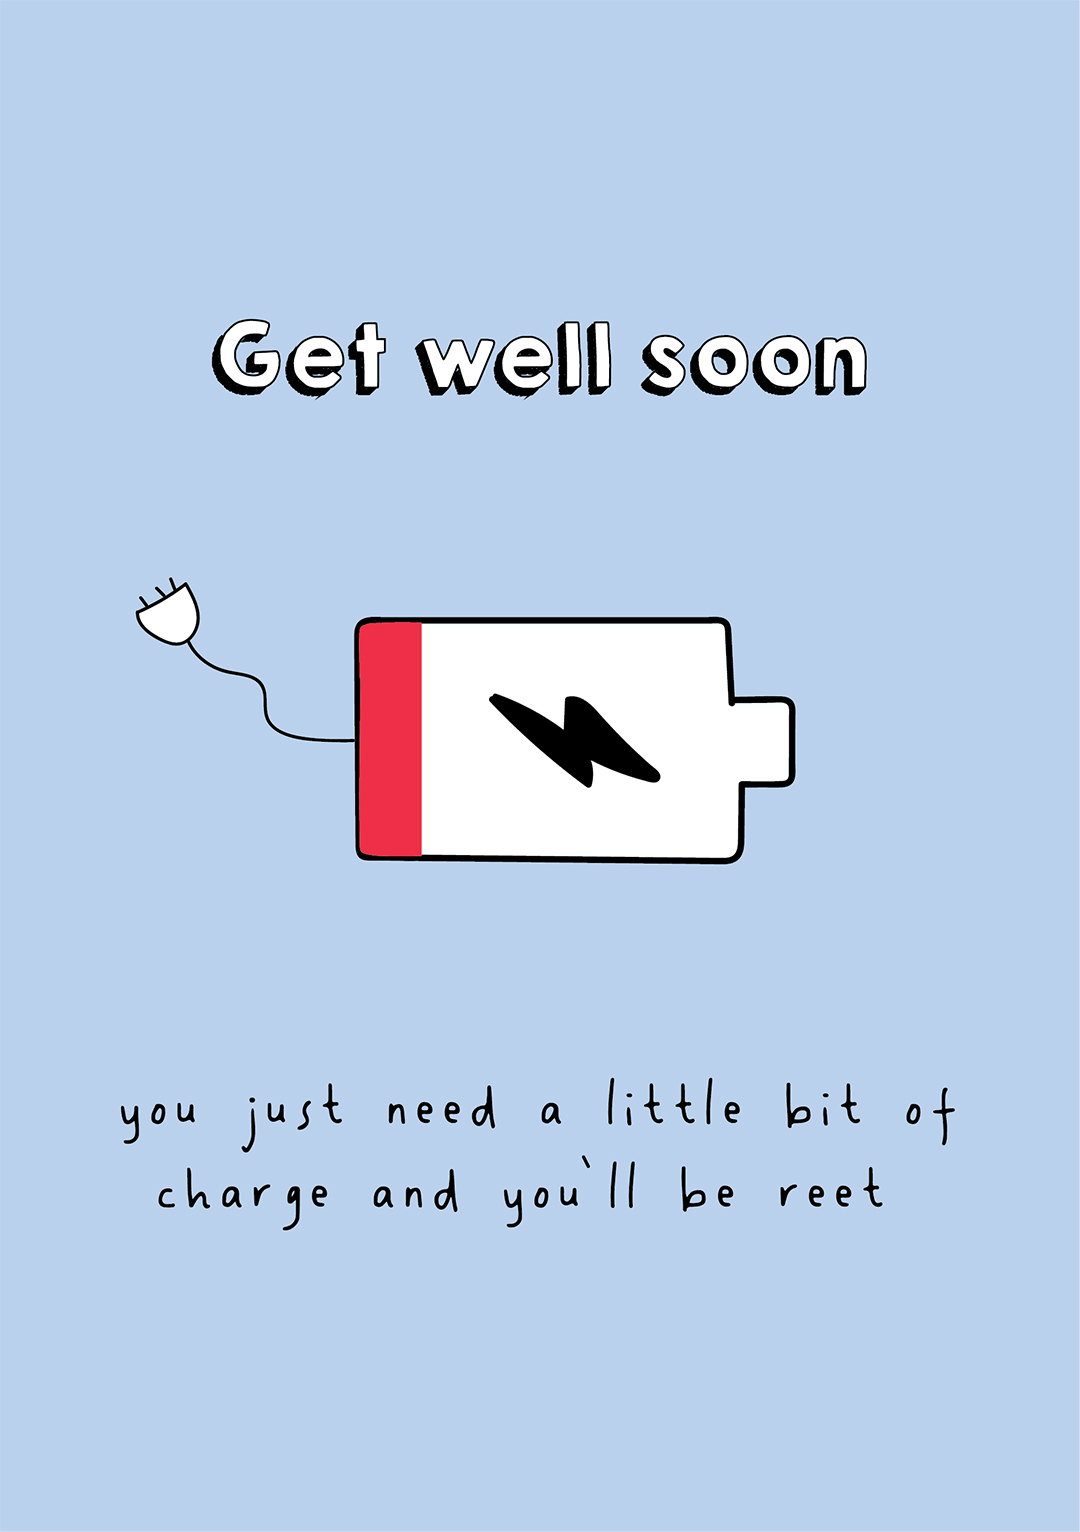 Get Well Soon - Little Bit Of A Charge